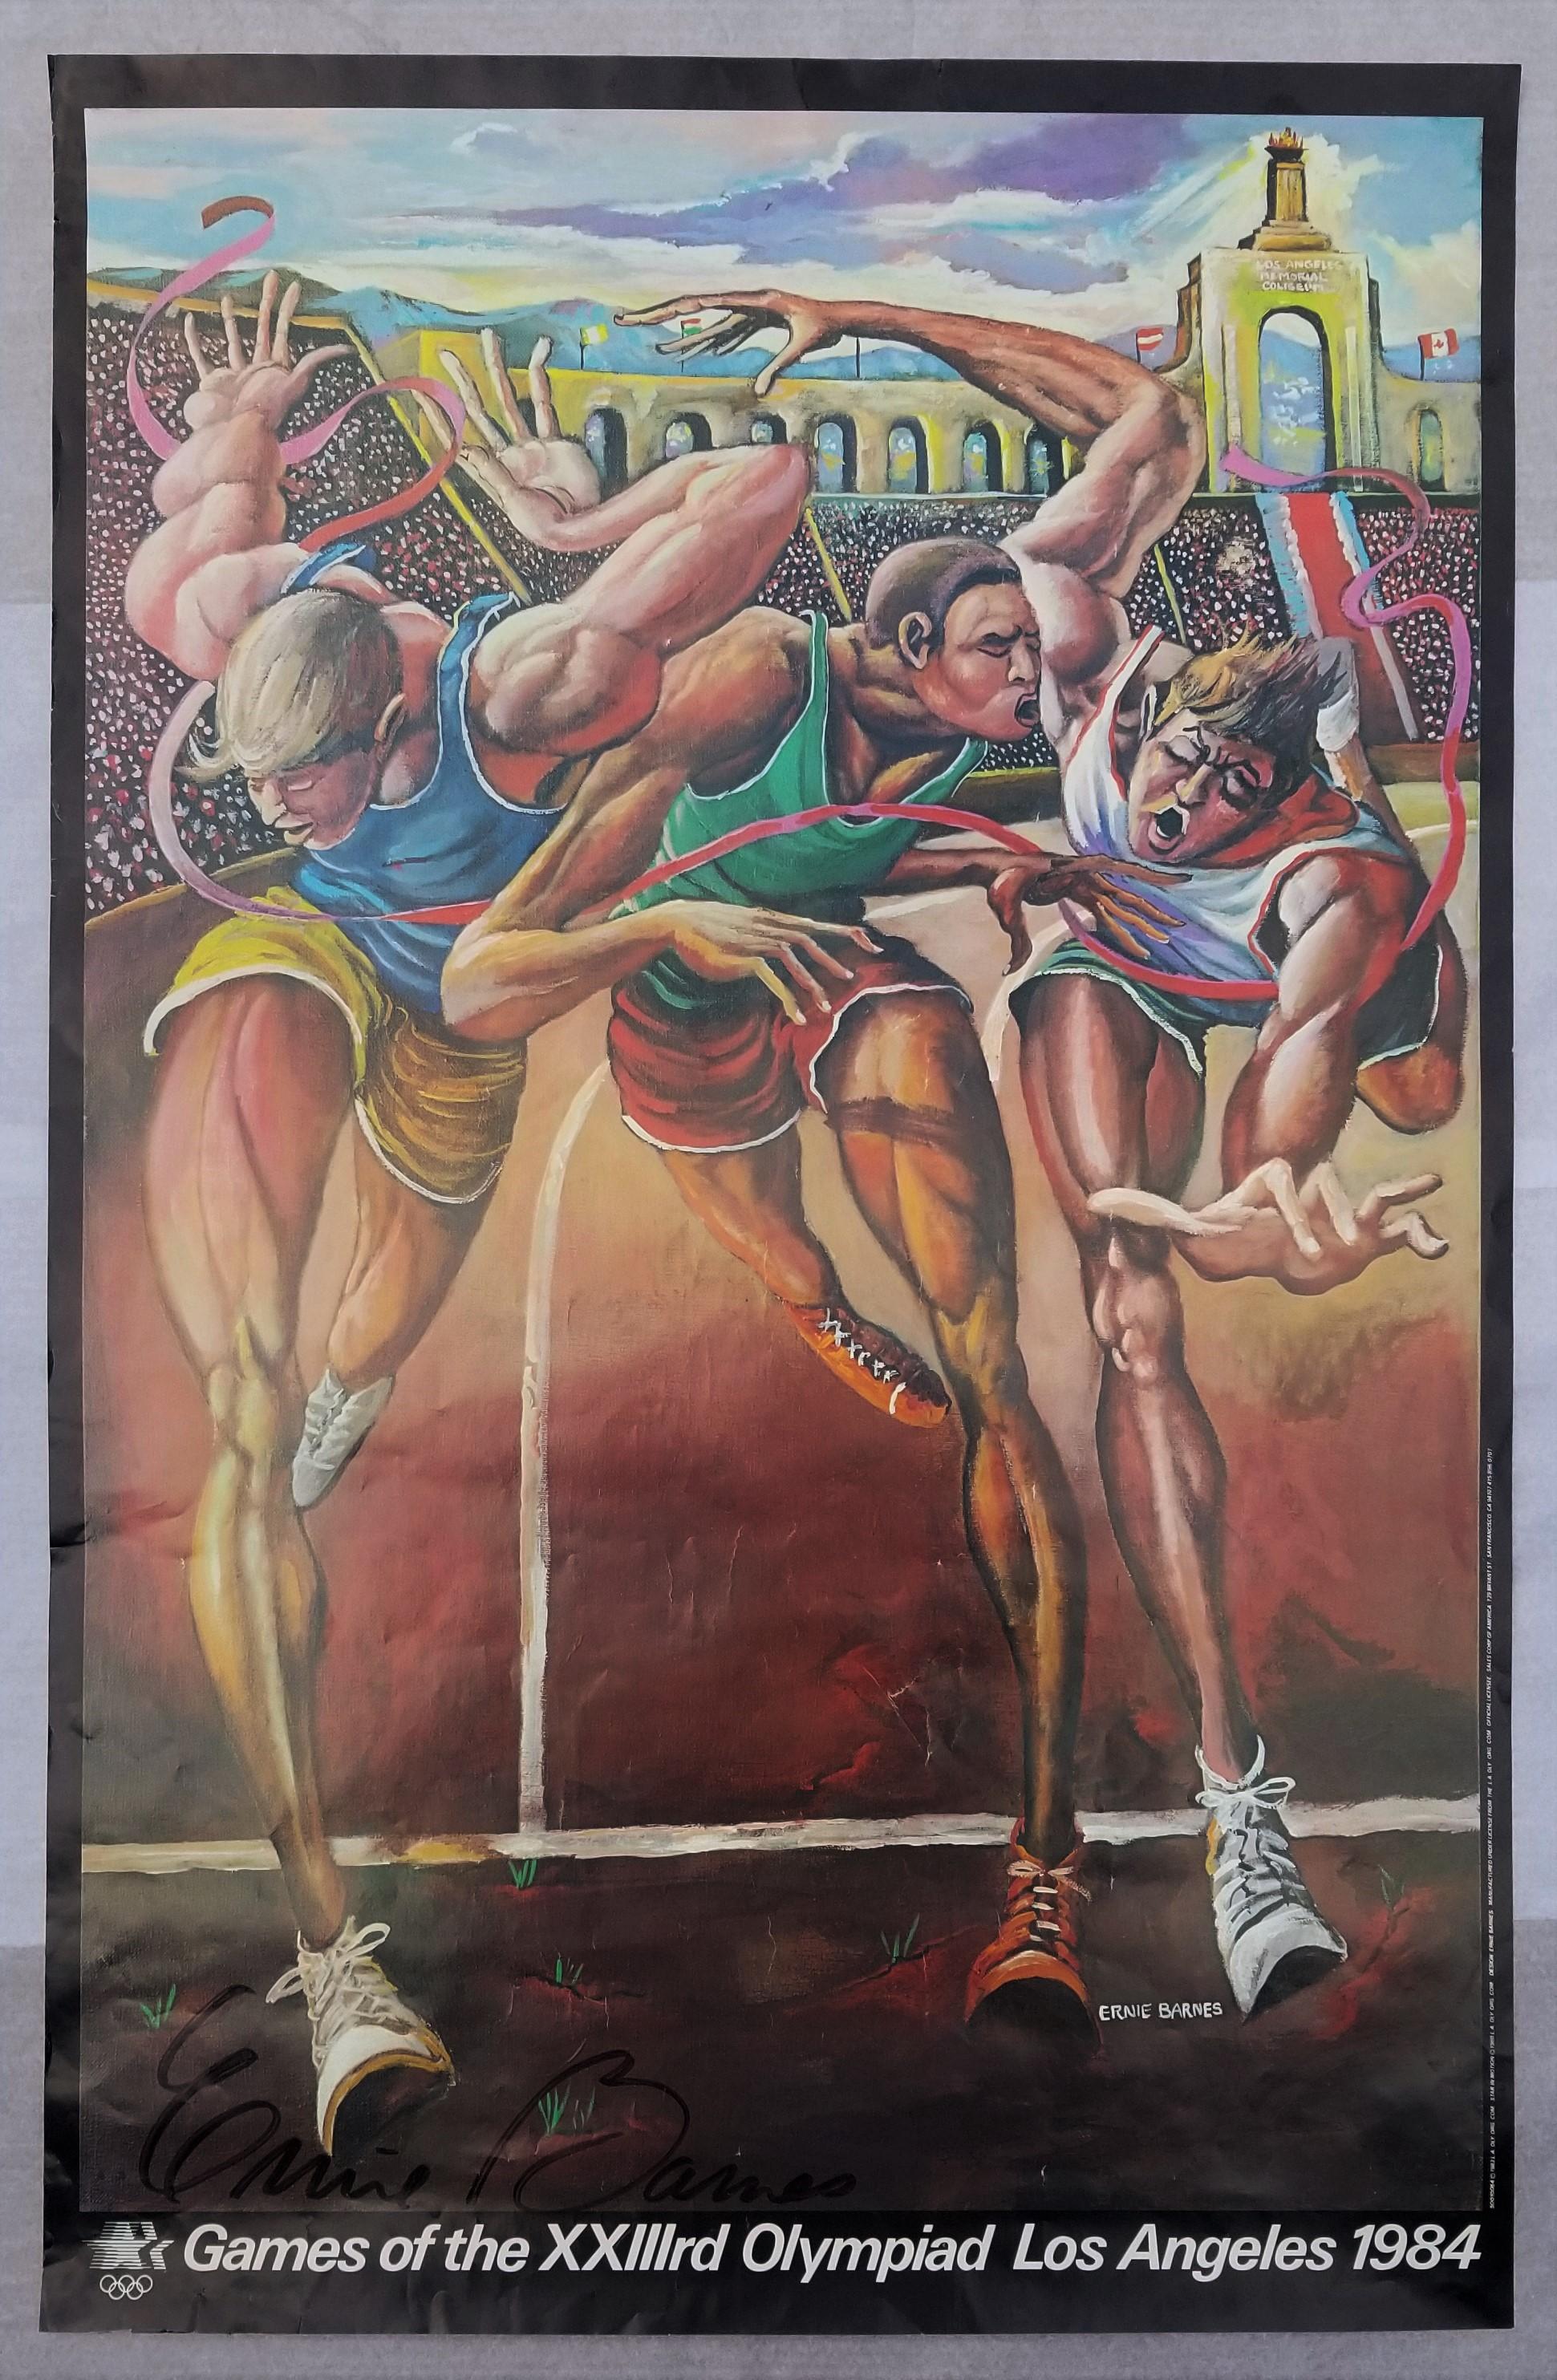 Los Angeles 1984 Olympic Games (The Finish) Poster (Signed) /// Black Art Sports - Print by Ernie Barnes